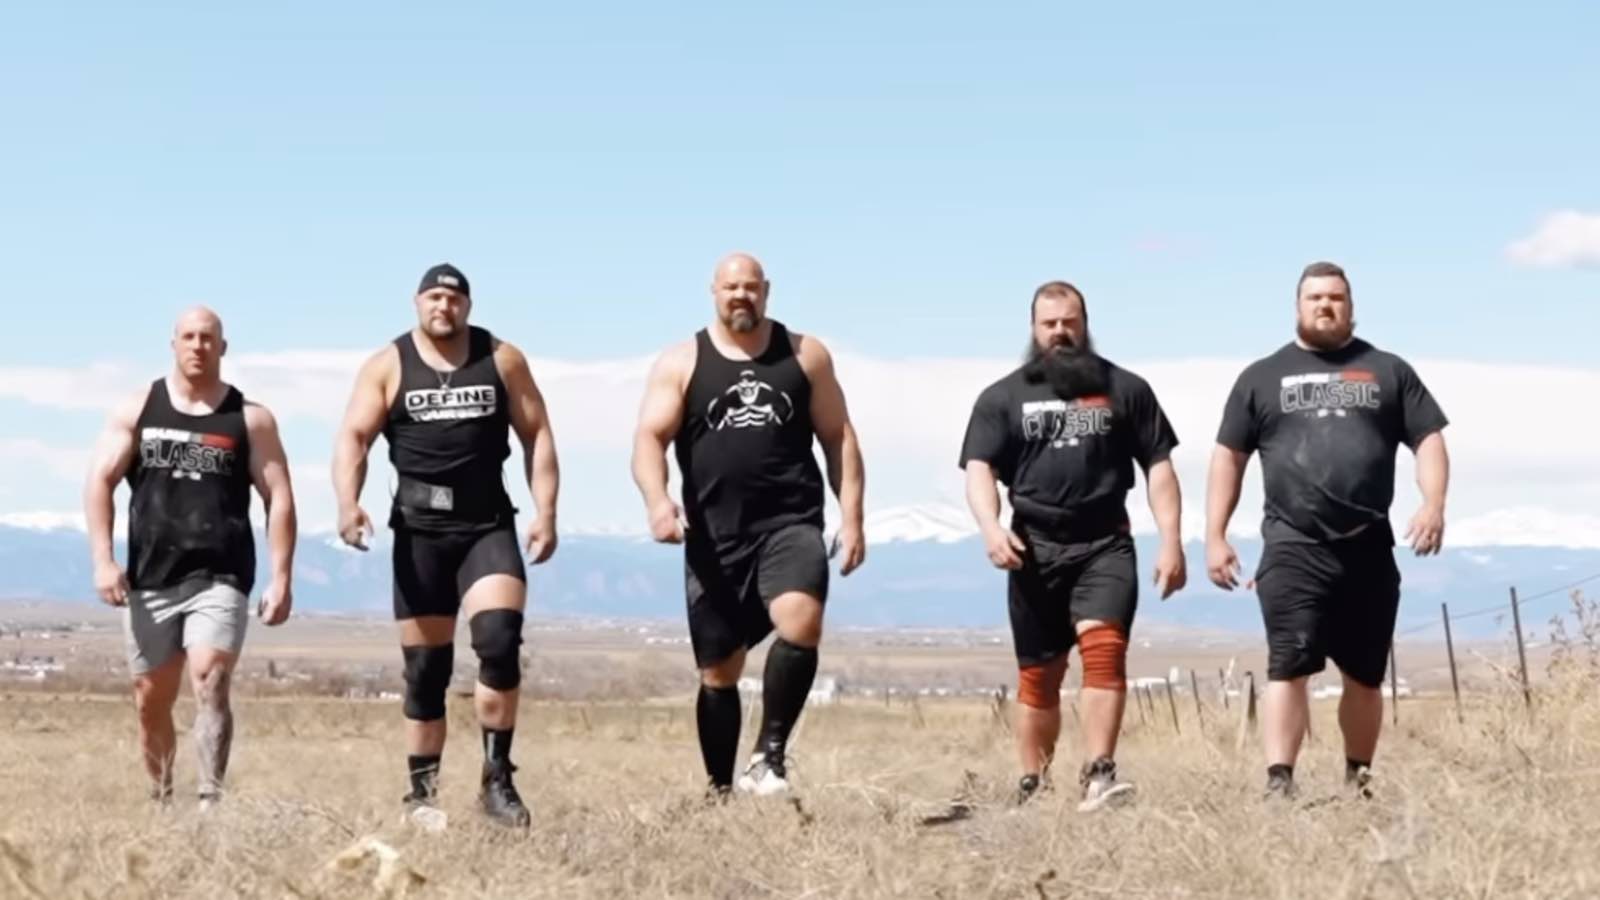 Brian Shaw Led 5 American Strongmen in World’s Strongest Man Training